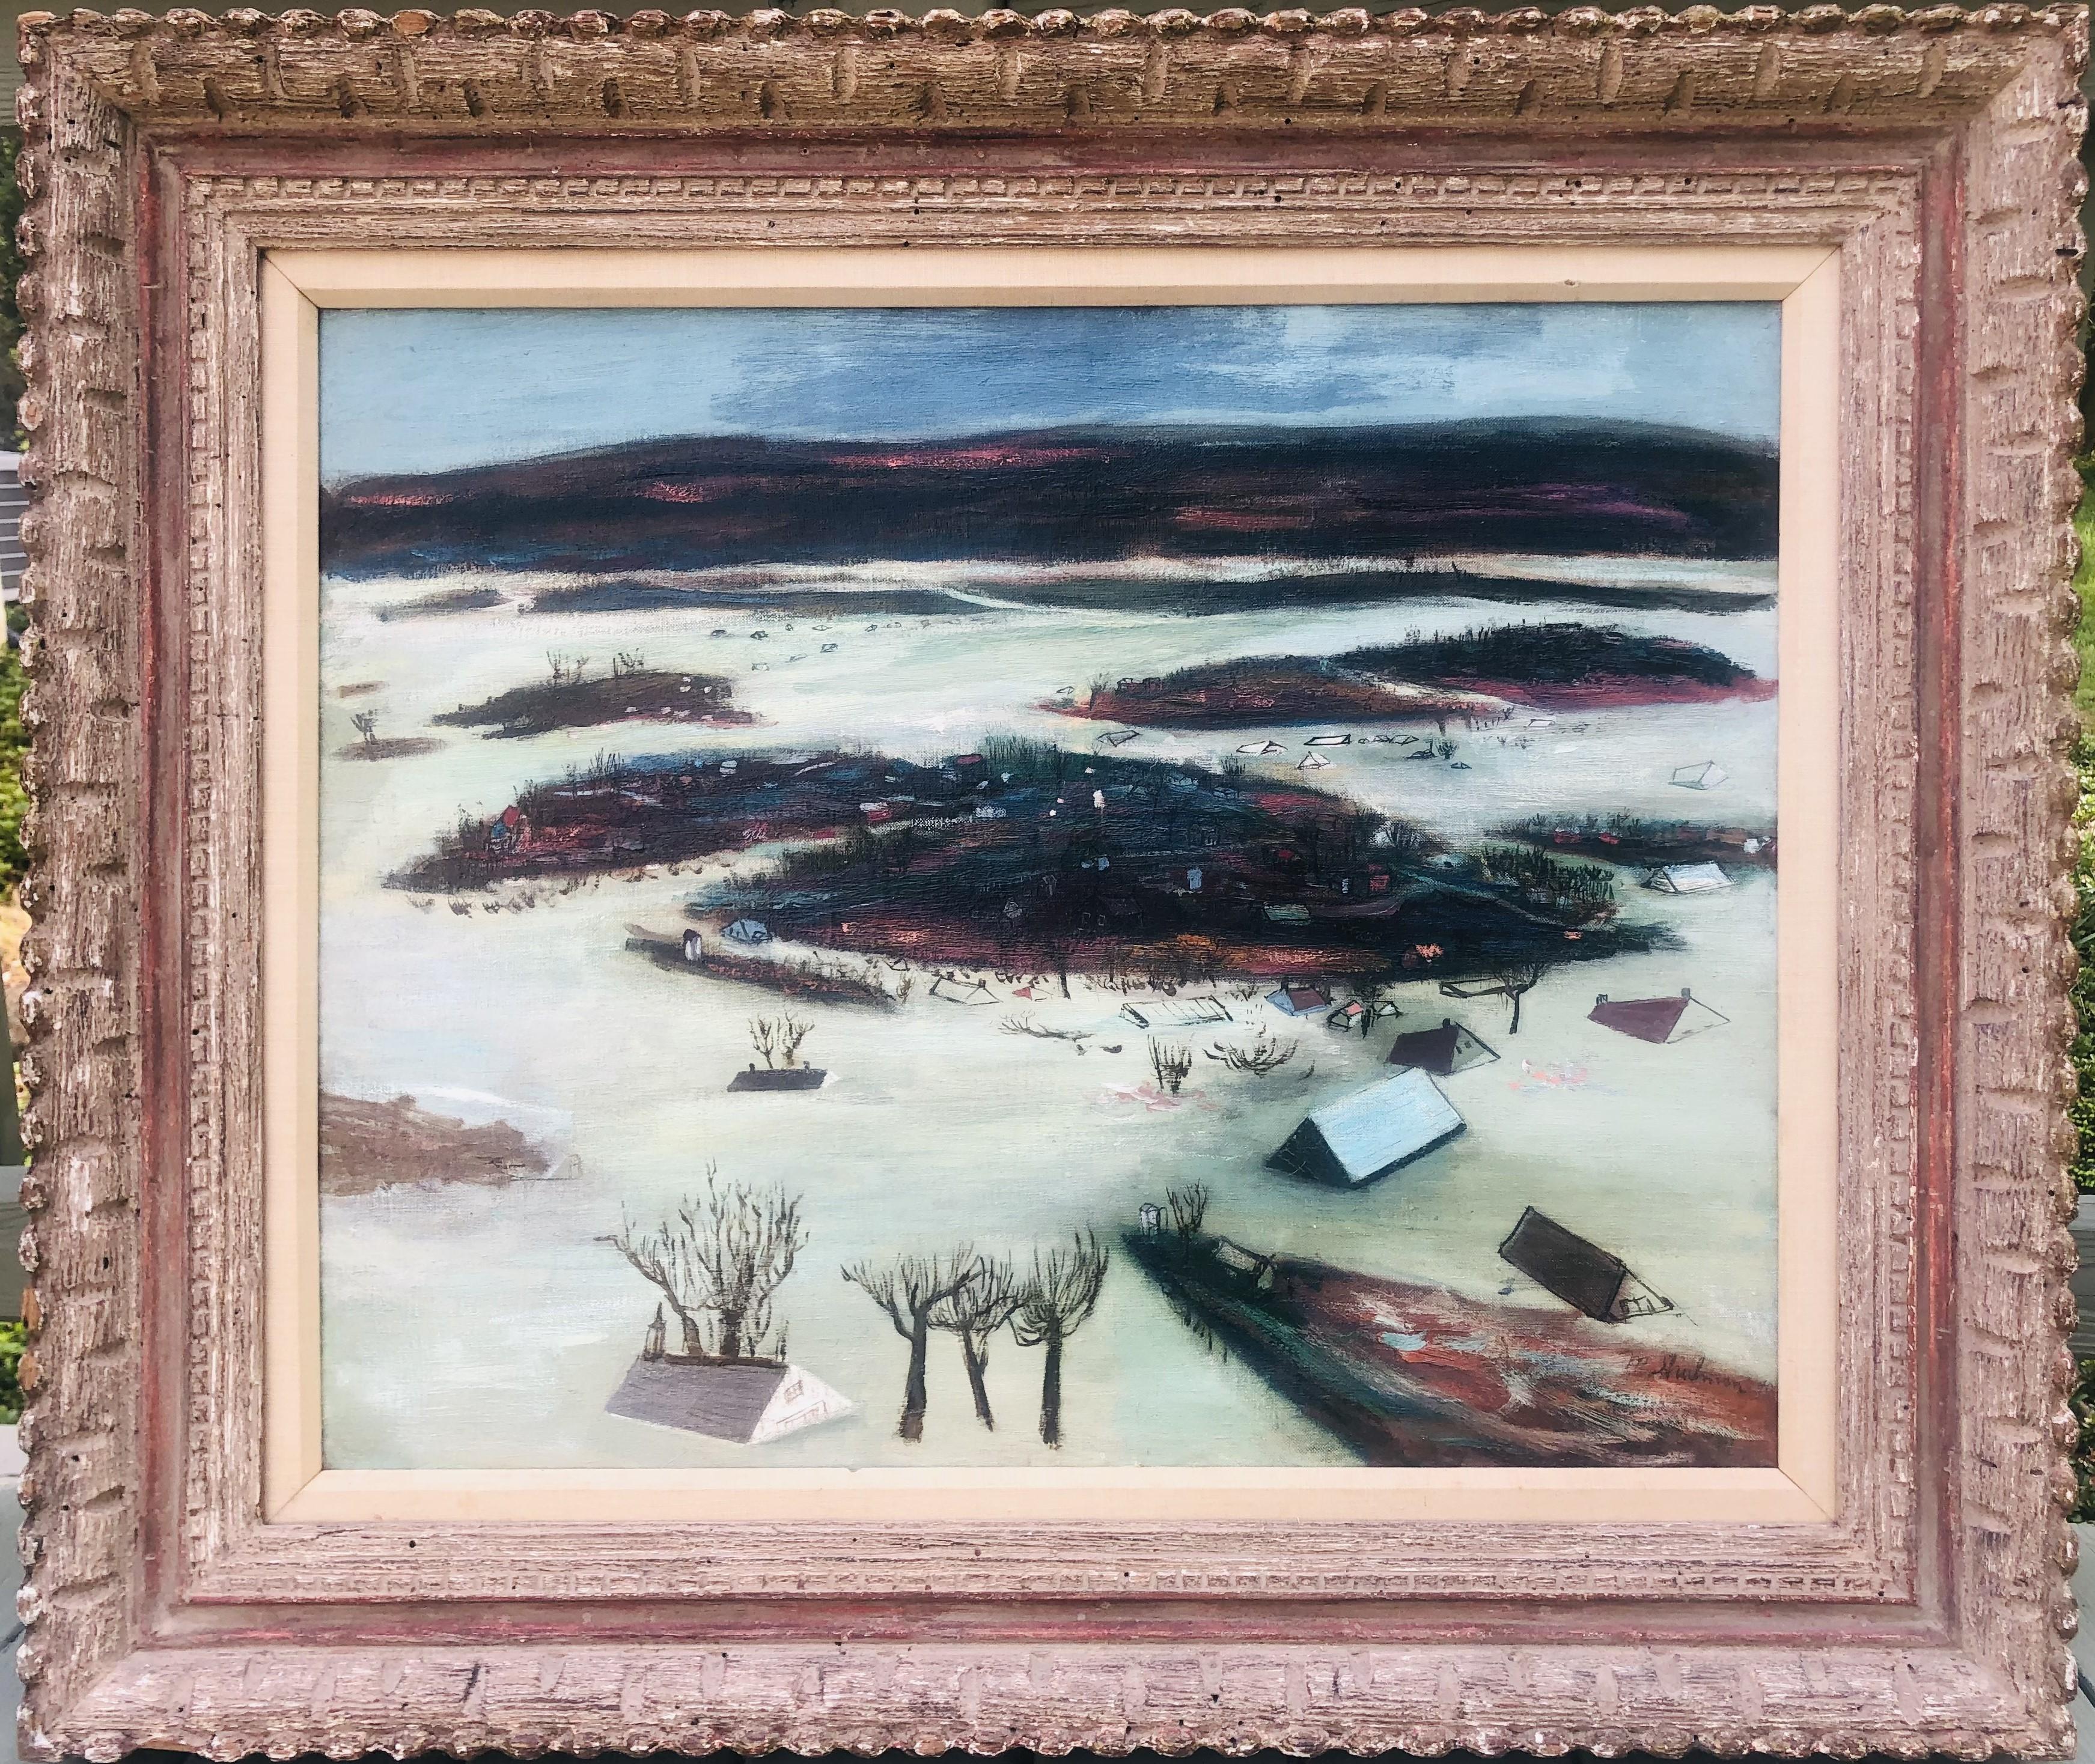 Fine WPA period painting by Morris Shulman. The painting is oil on canvass measuring 24" x 30". Signed M Shulman and dated '40 at the lower right.  Titled verso "Spring Flood."  Shulman produced a number of paintings titled Spring Flood - this